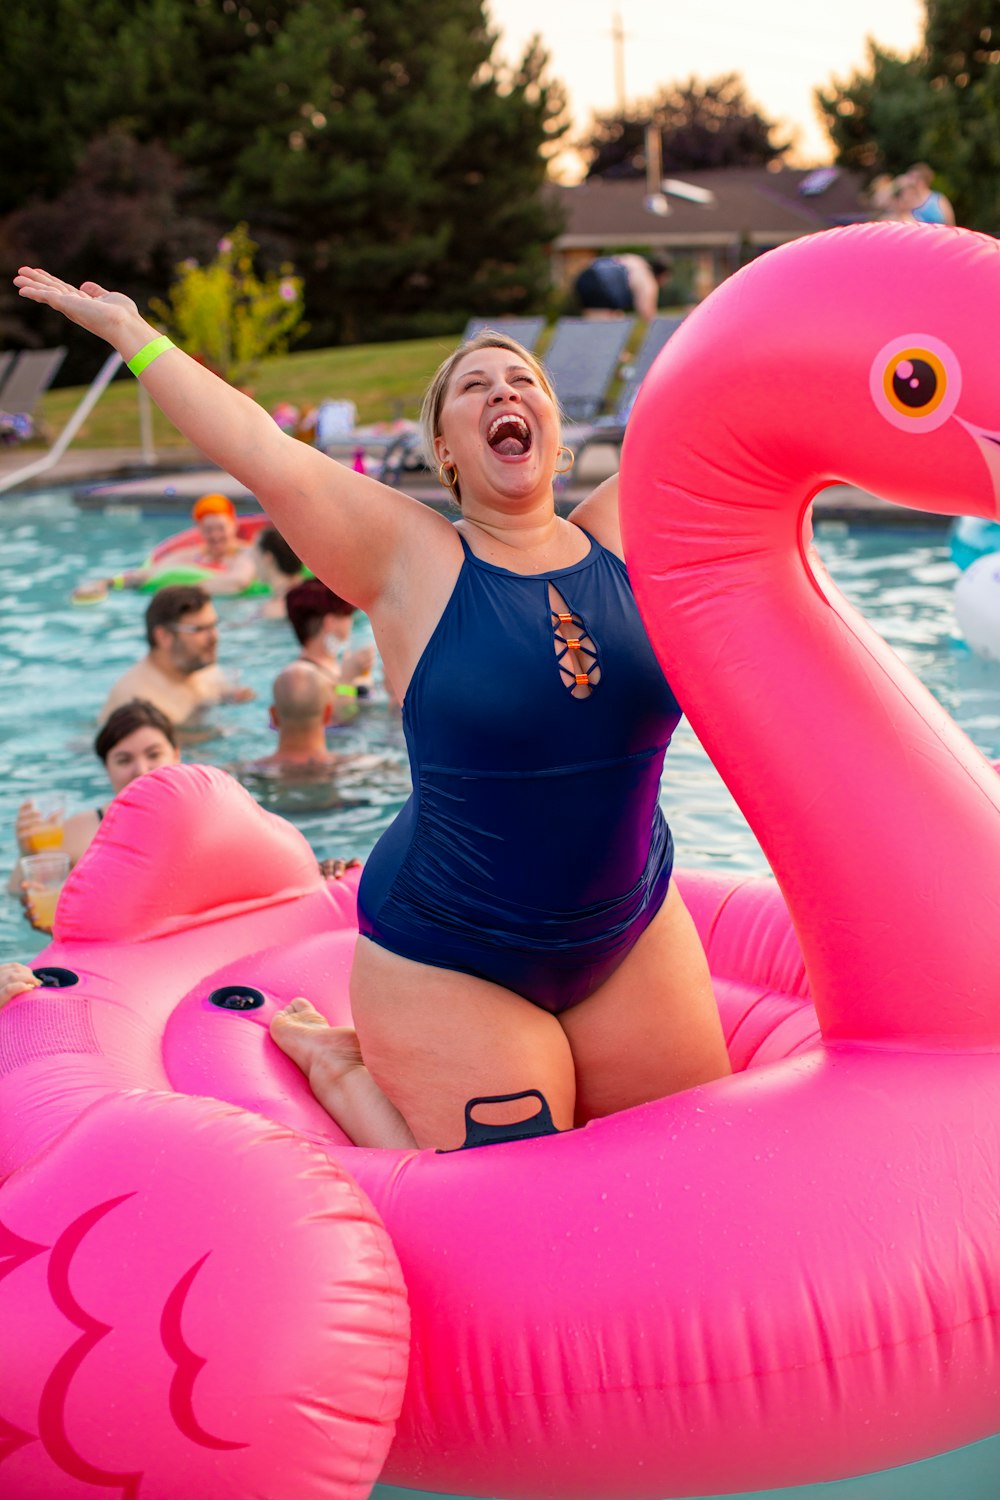 woman wearing blue swimsuit knee on pink flamingo floaters during daytime